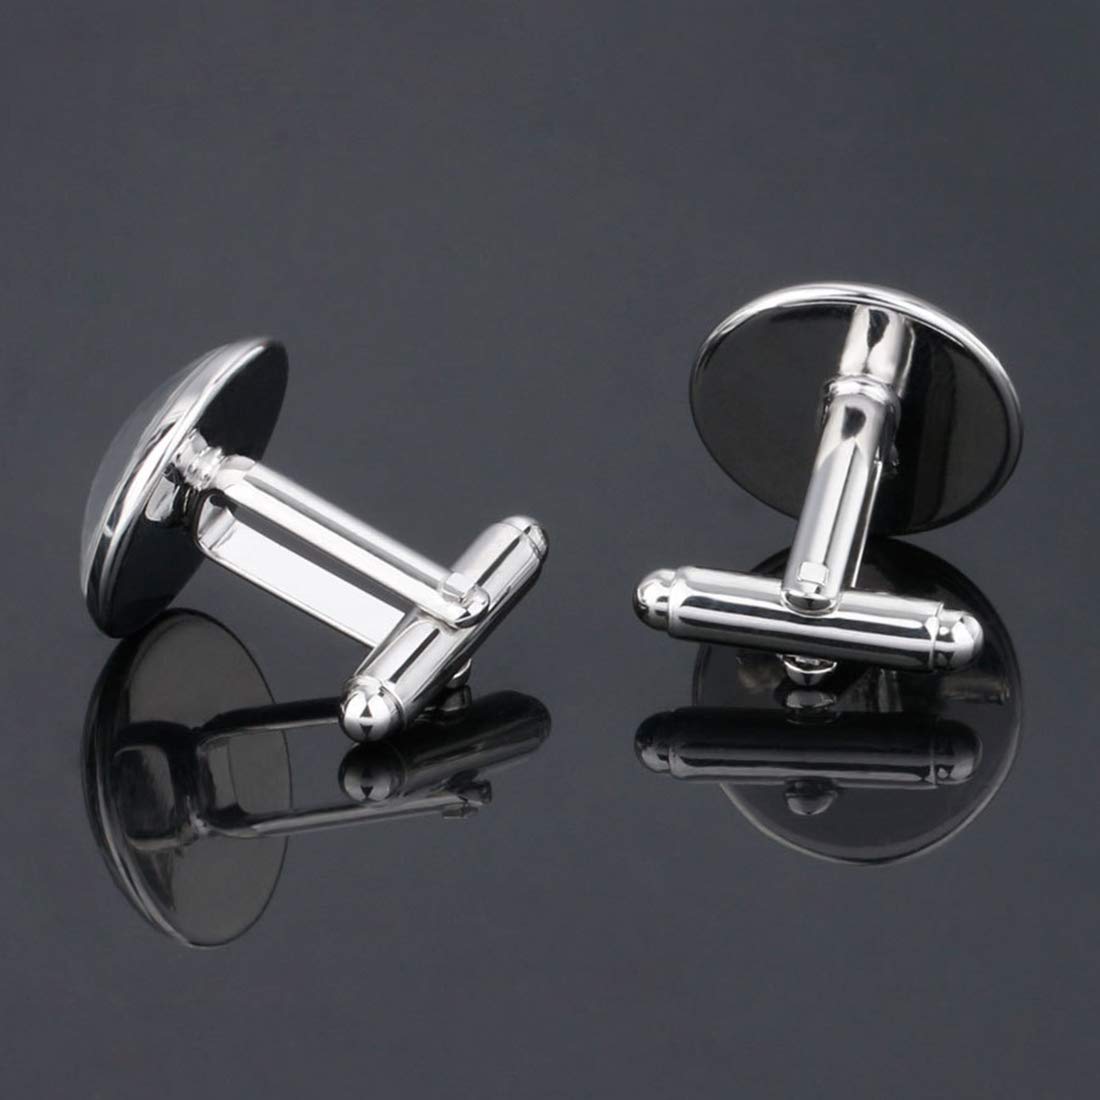 Yellow Chimes Cufflinks for Men Alphabets Cuff Links Letter M Statement Stainless Steel Cufflinks for Men and Boy's.